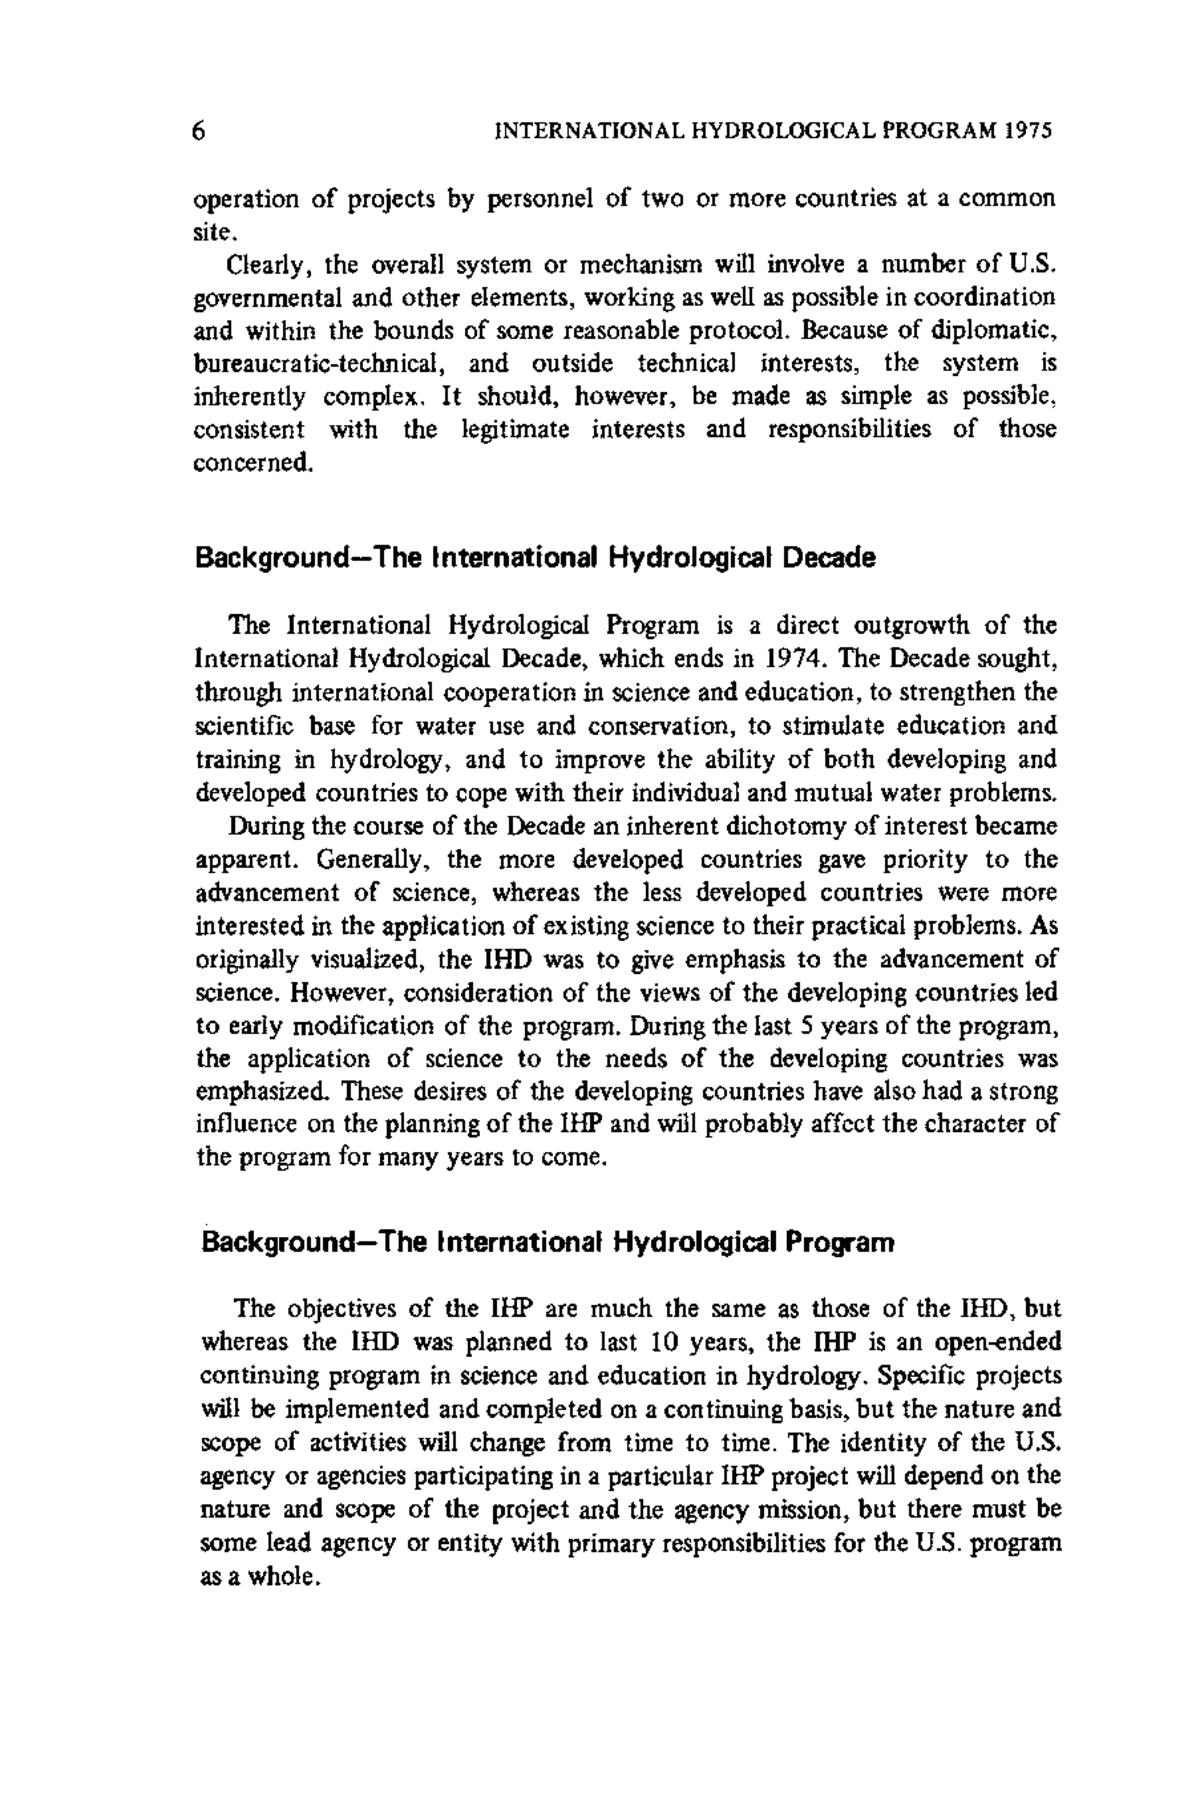 THE PROBLEM AND ITS BACKGROUND | United States Participation in the  International Hydrological Program 1975-: A Report of the Panel on  Post-Decade Procedures to the . National Committee for the International  Hydrological